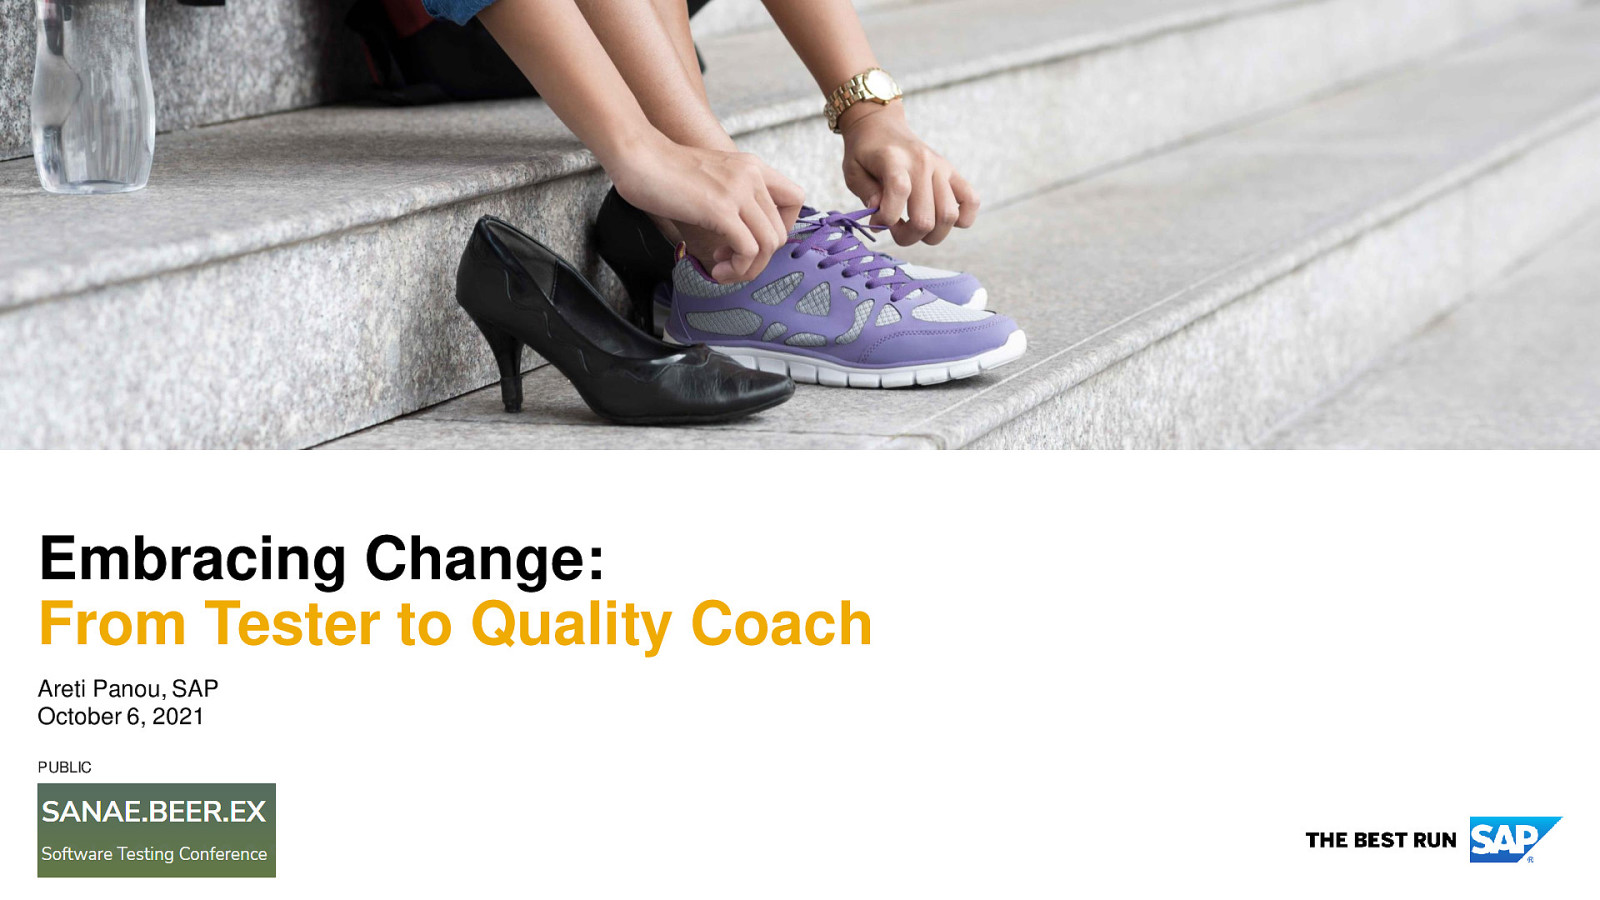 Embracing Change: From Tester to Quality Coach